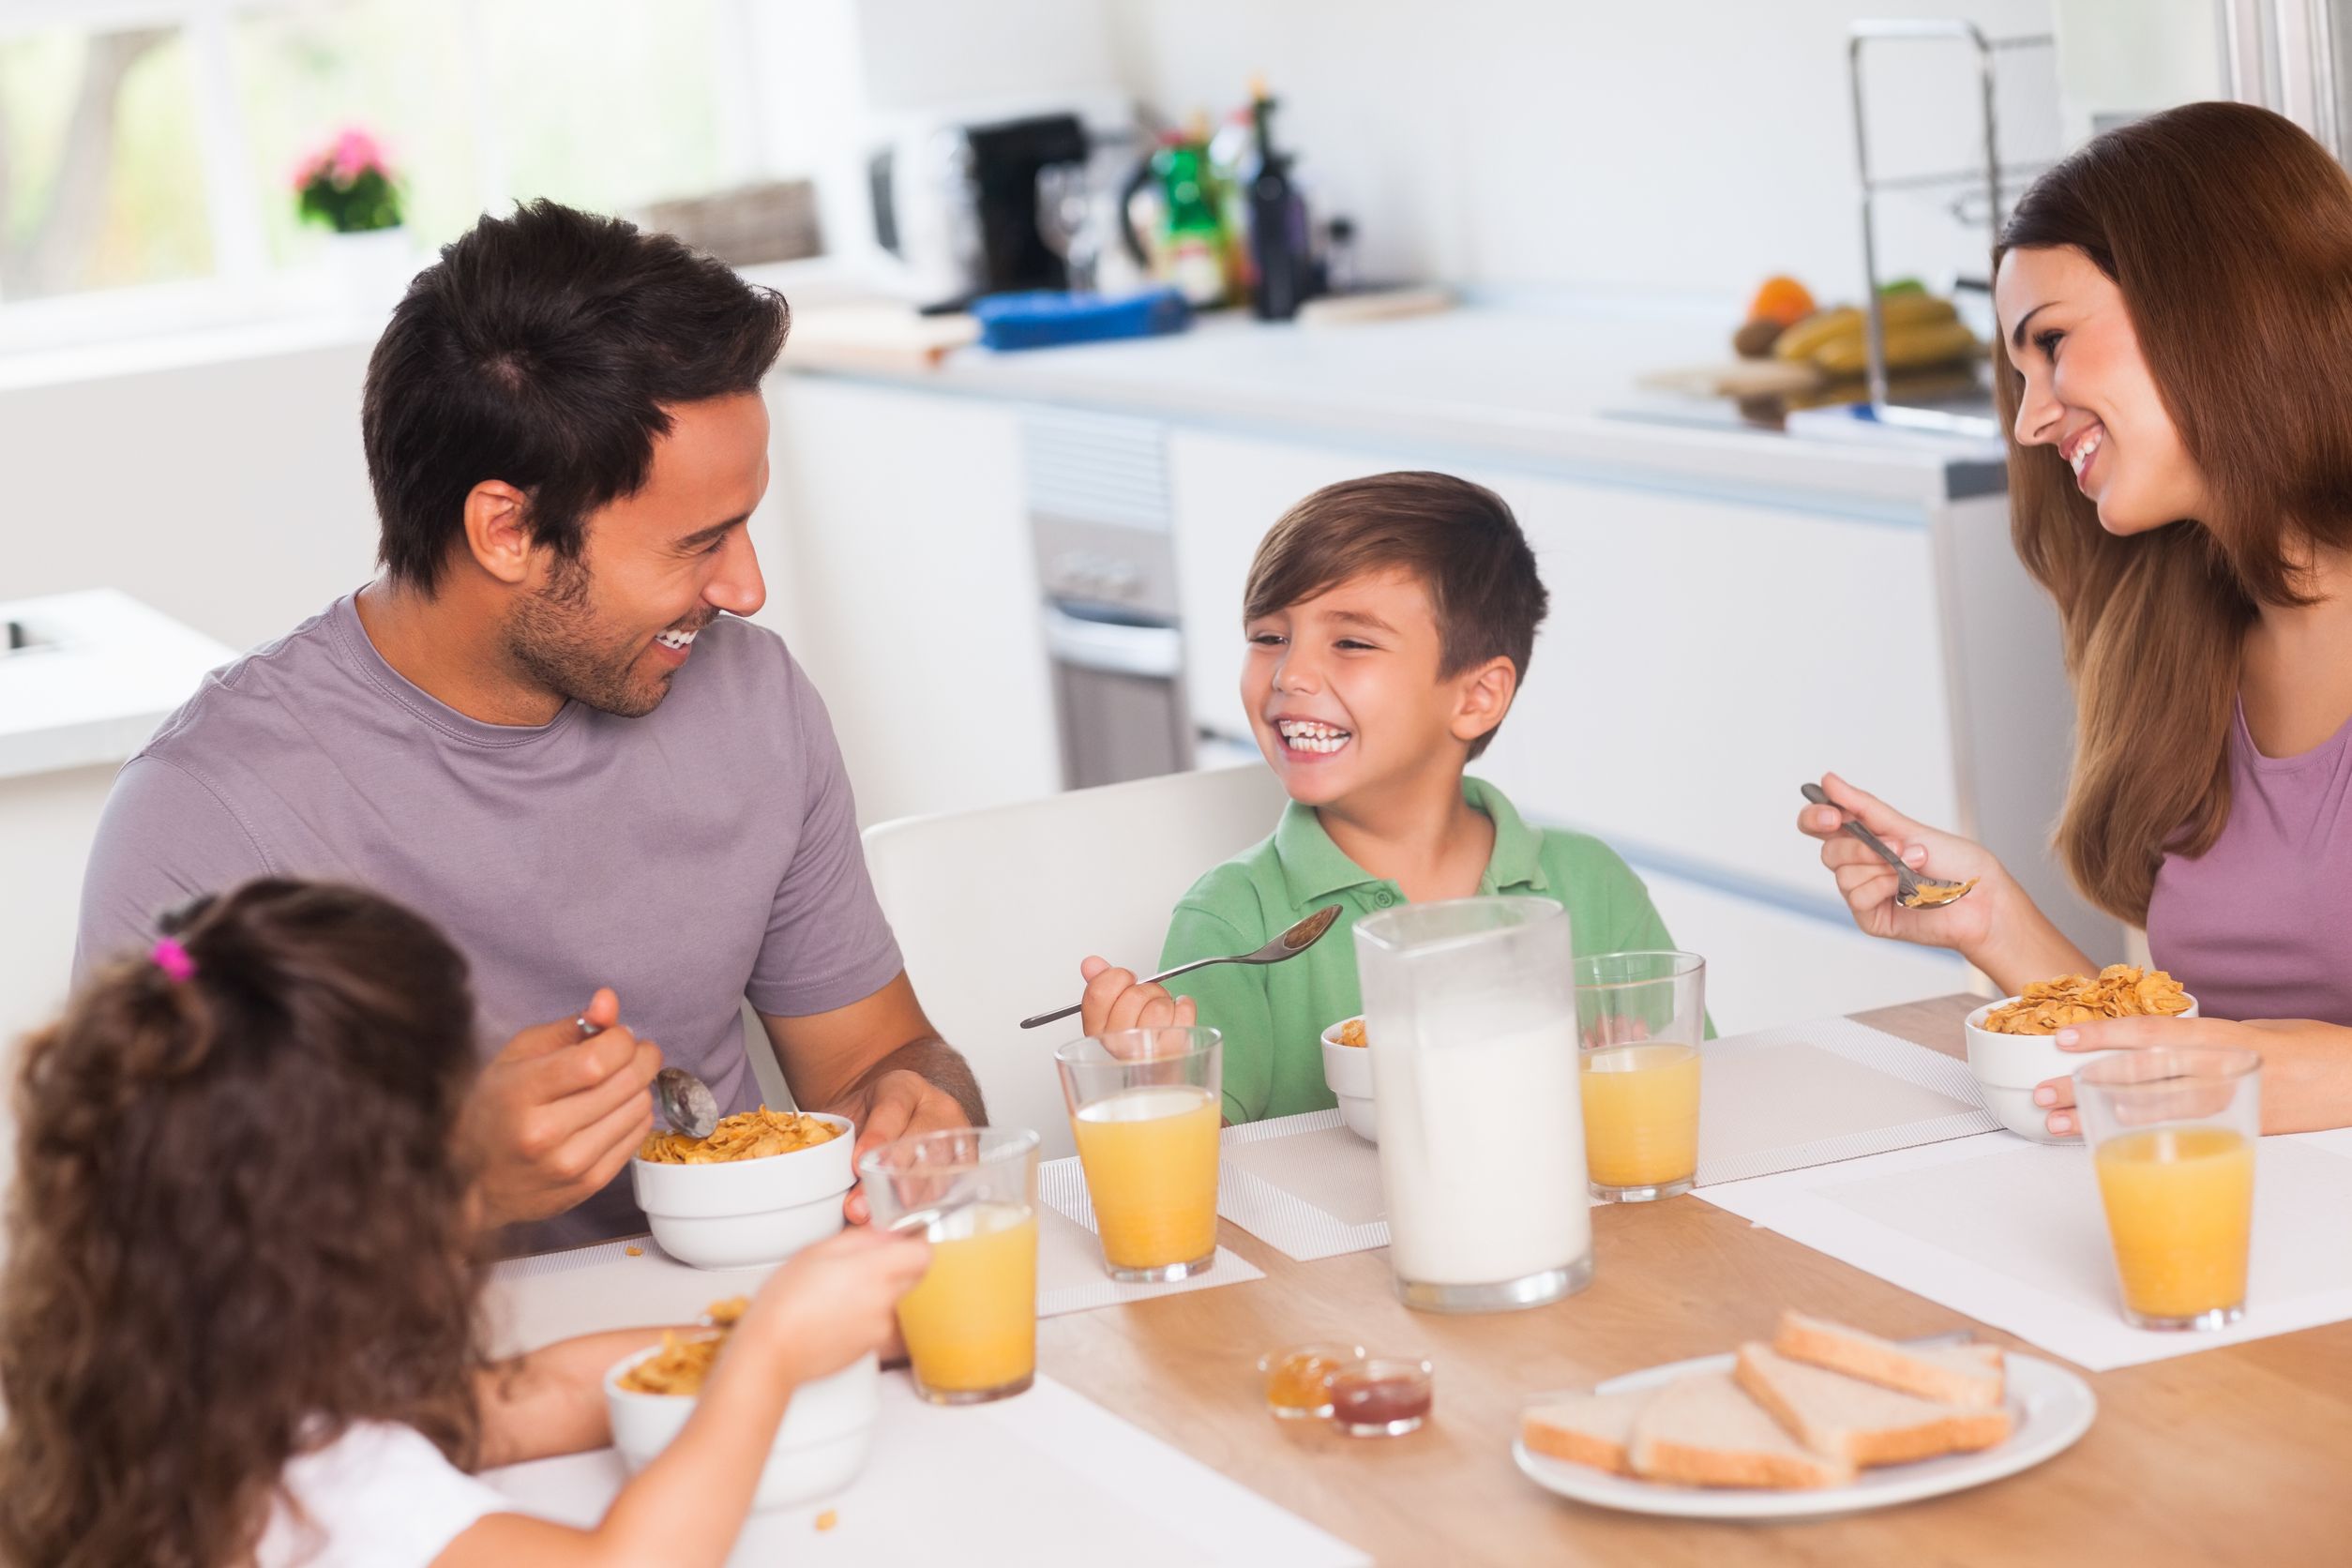 Take back family breakfasts with these tips